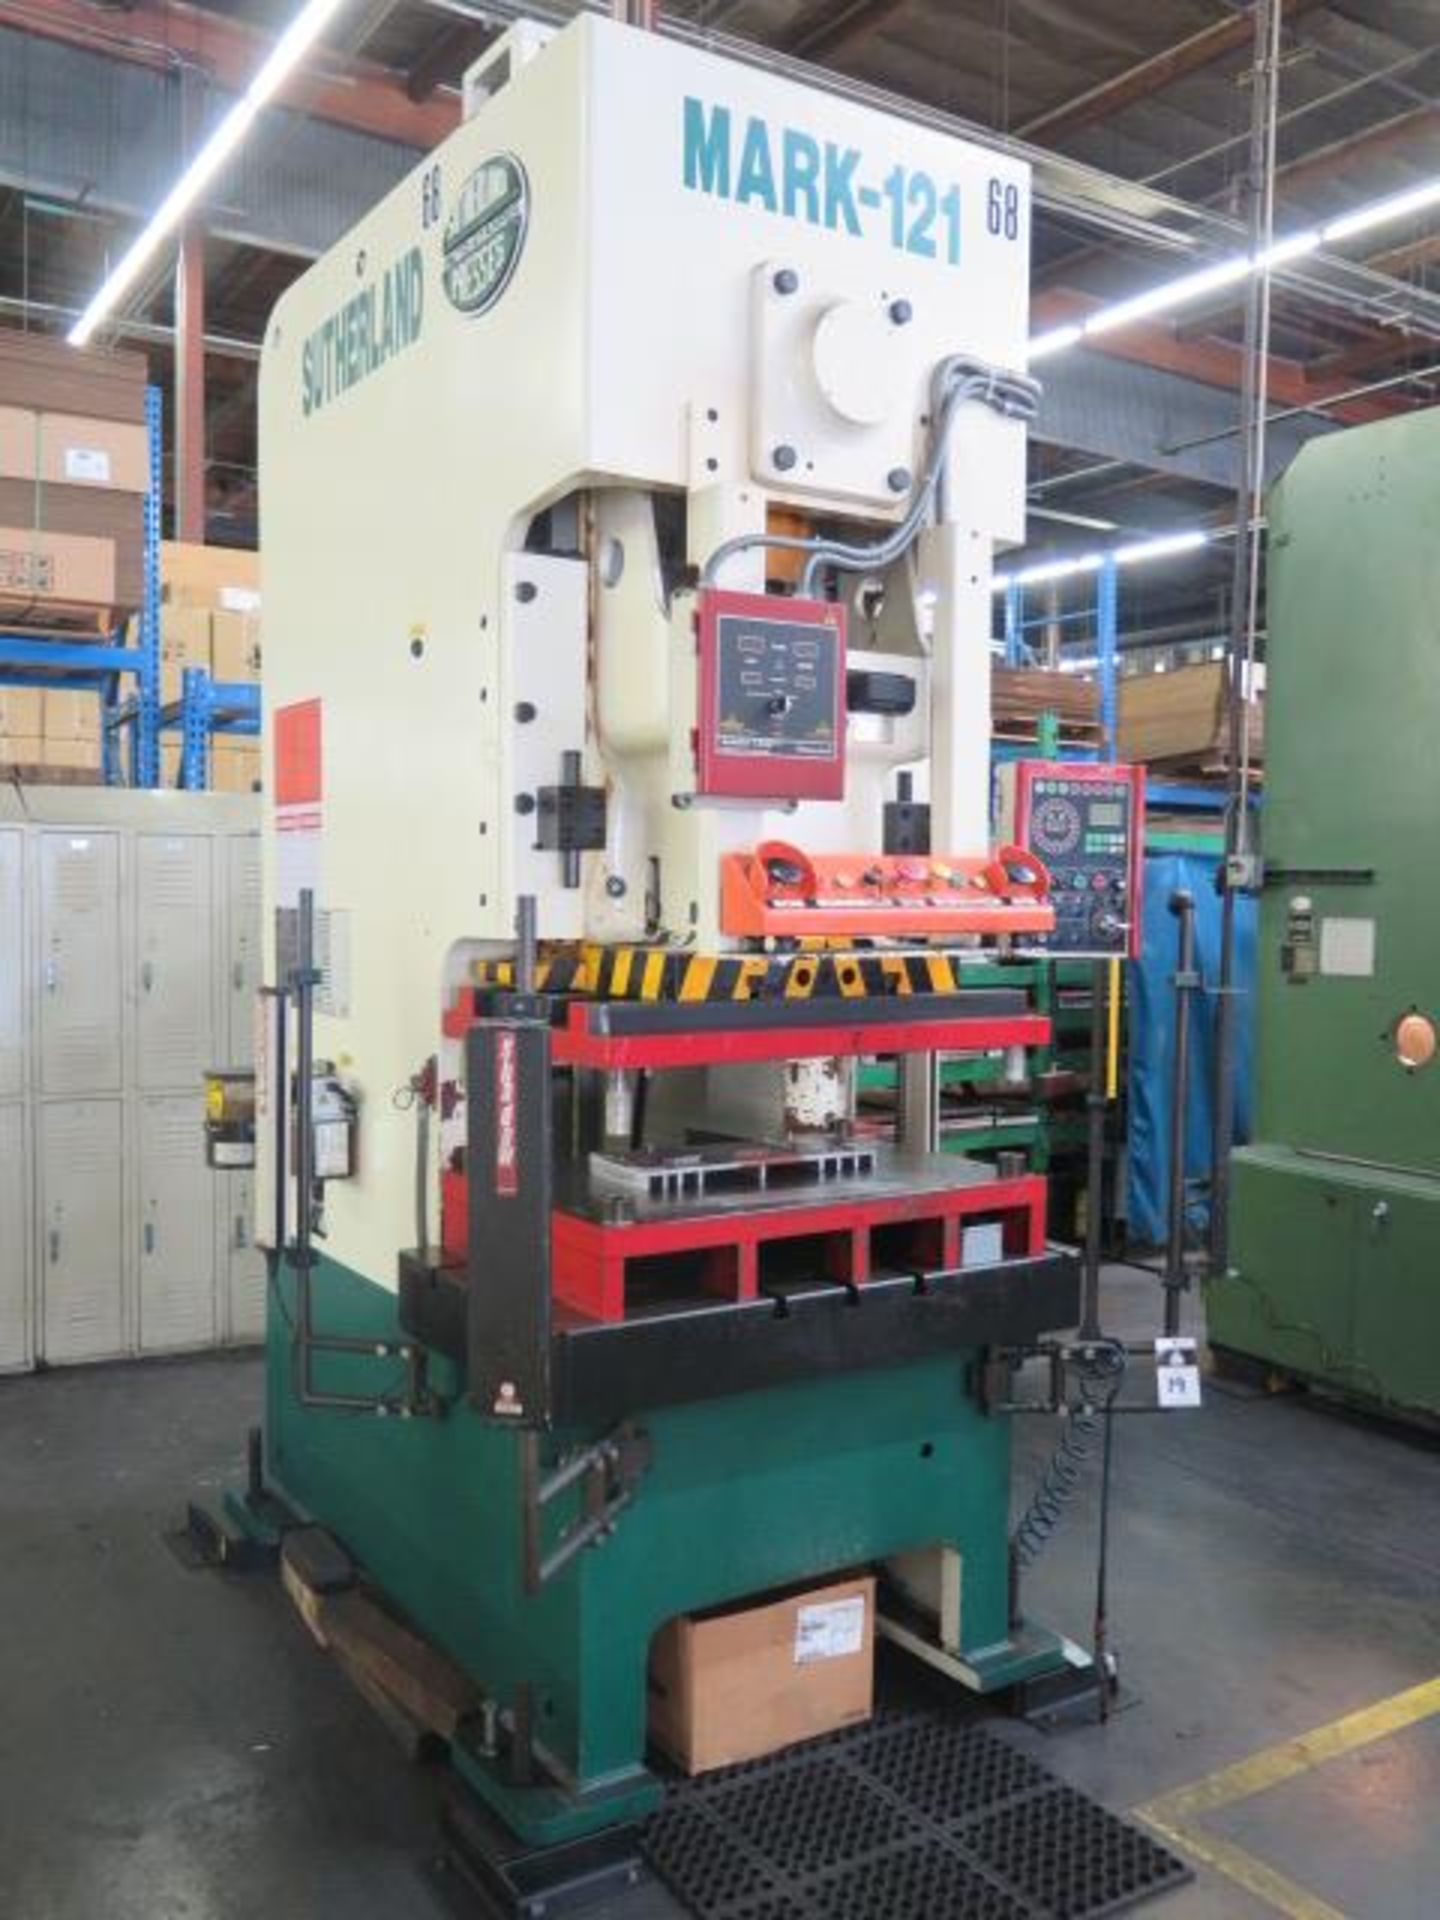 2002 Southerland MARK-121 121 Ton Gap Frame Punch Press s/n 10201101009 Wintress Control, SOLD AS IS - Image 3 of 18